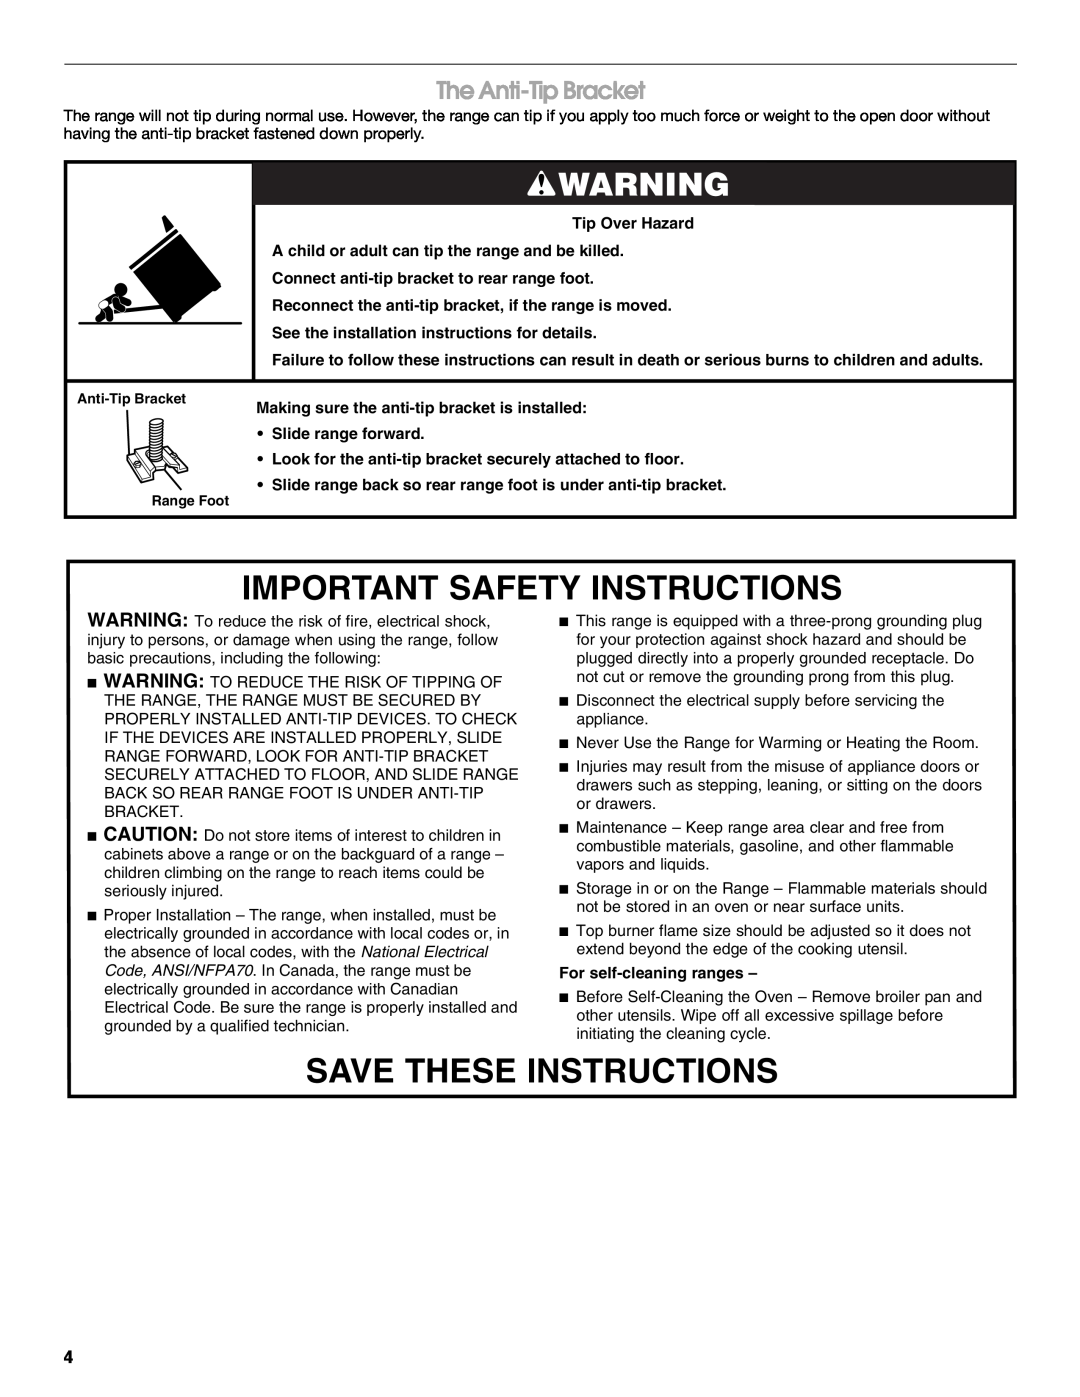 Whirlpool IGS365RS0 Important Safety Instructions, Save These Instructions, The Anti-Tip Bracket, For self-cleaning ranges 